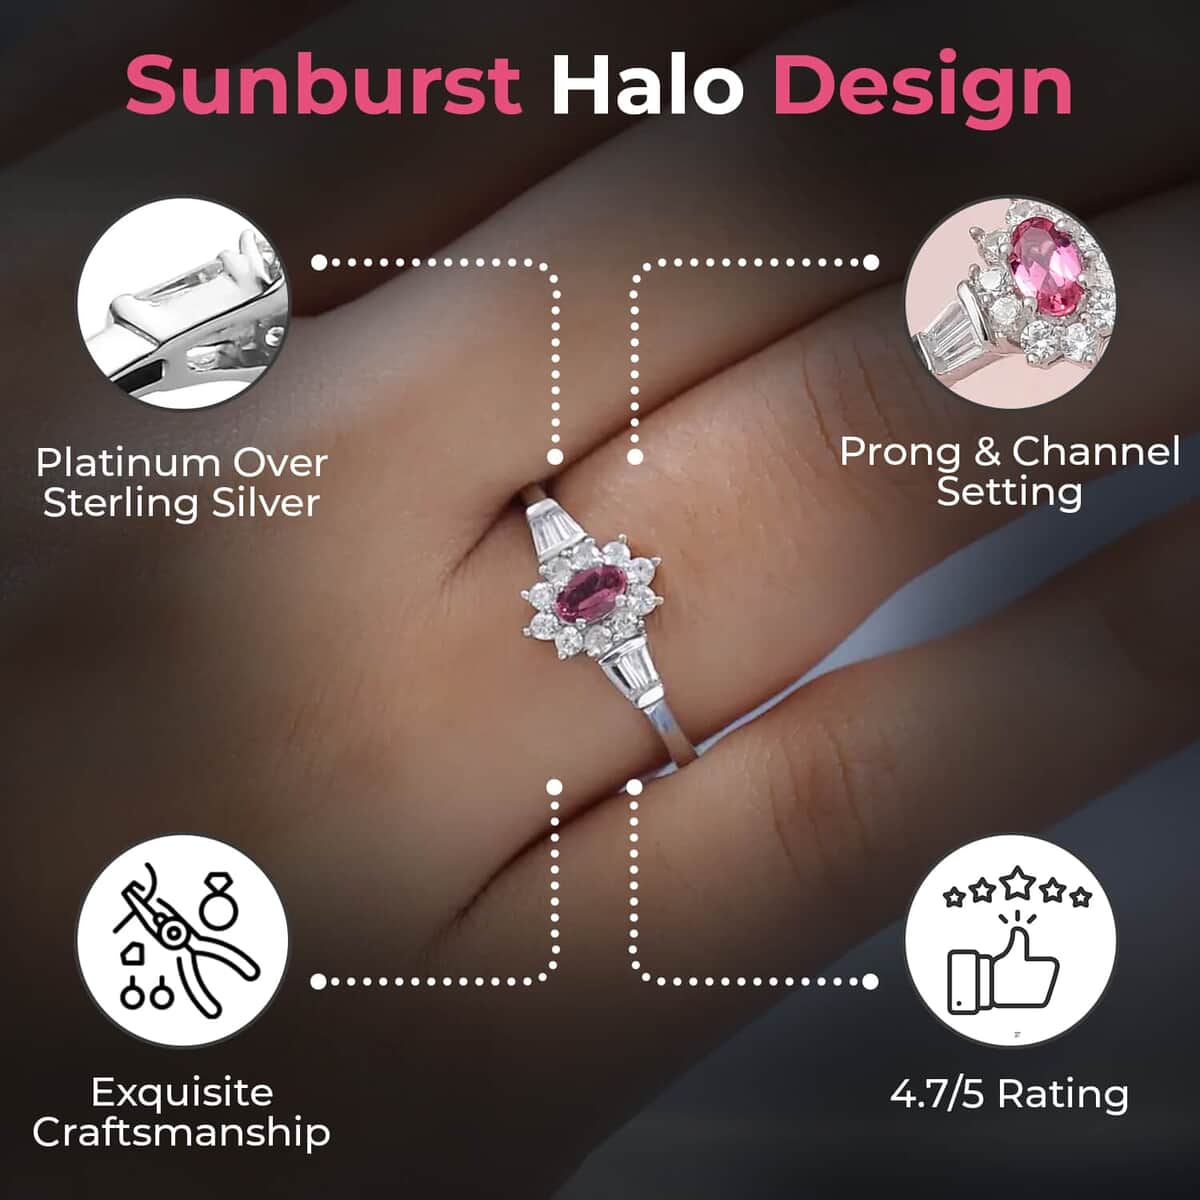 Premium Ouro Fino Rubellite Ring, White Zircon Accent Ring, Sunburst Halo Ring, Platinum Over Sterling Silver Ring 0.75 ctw (Size 10.0) image number 2